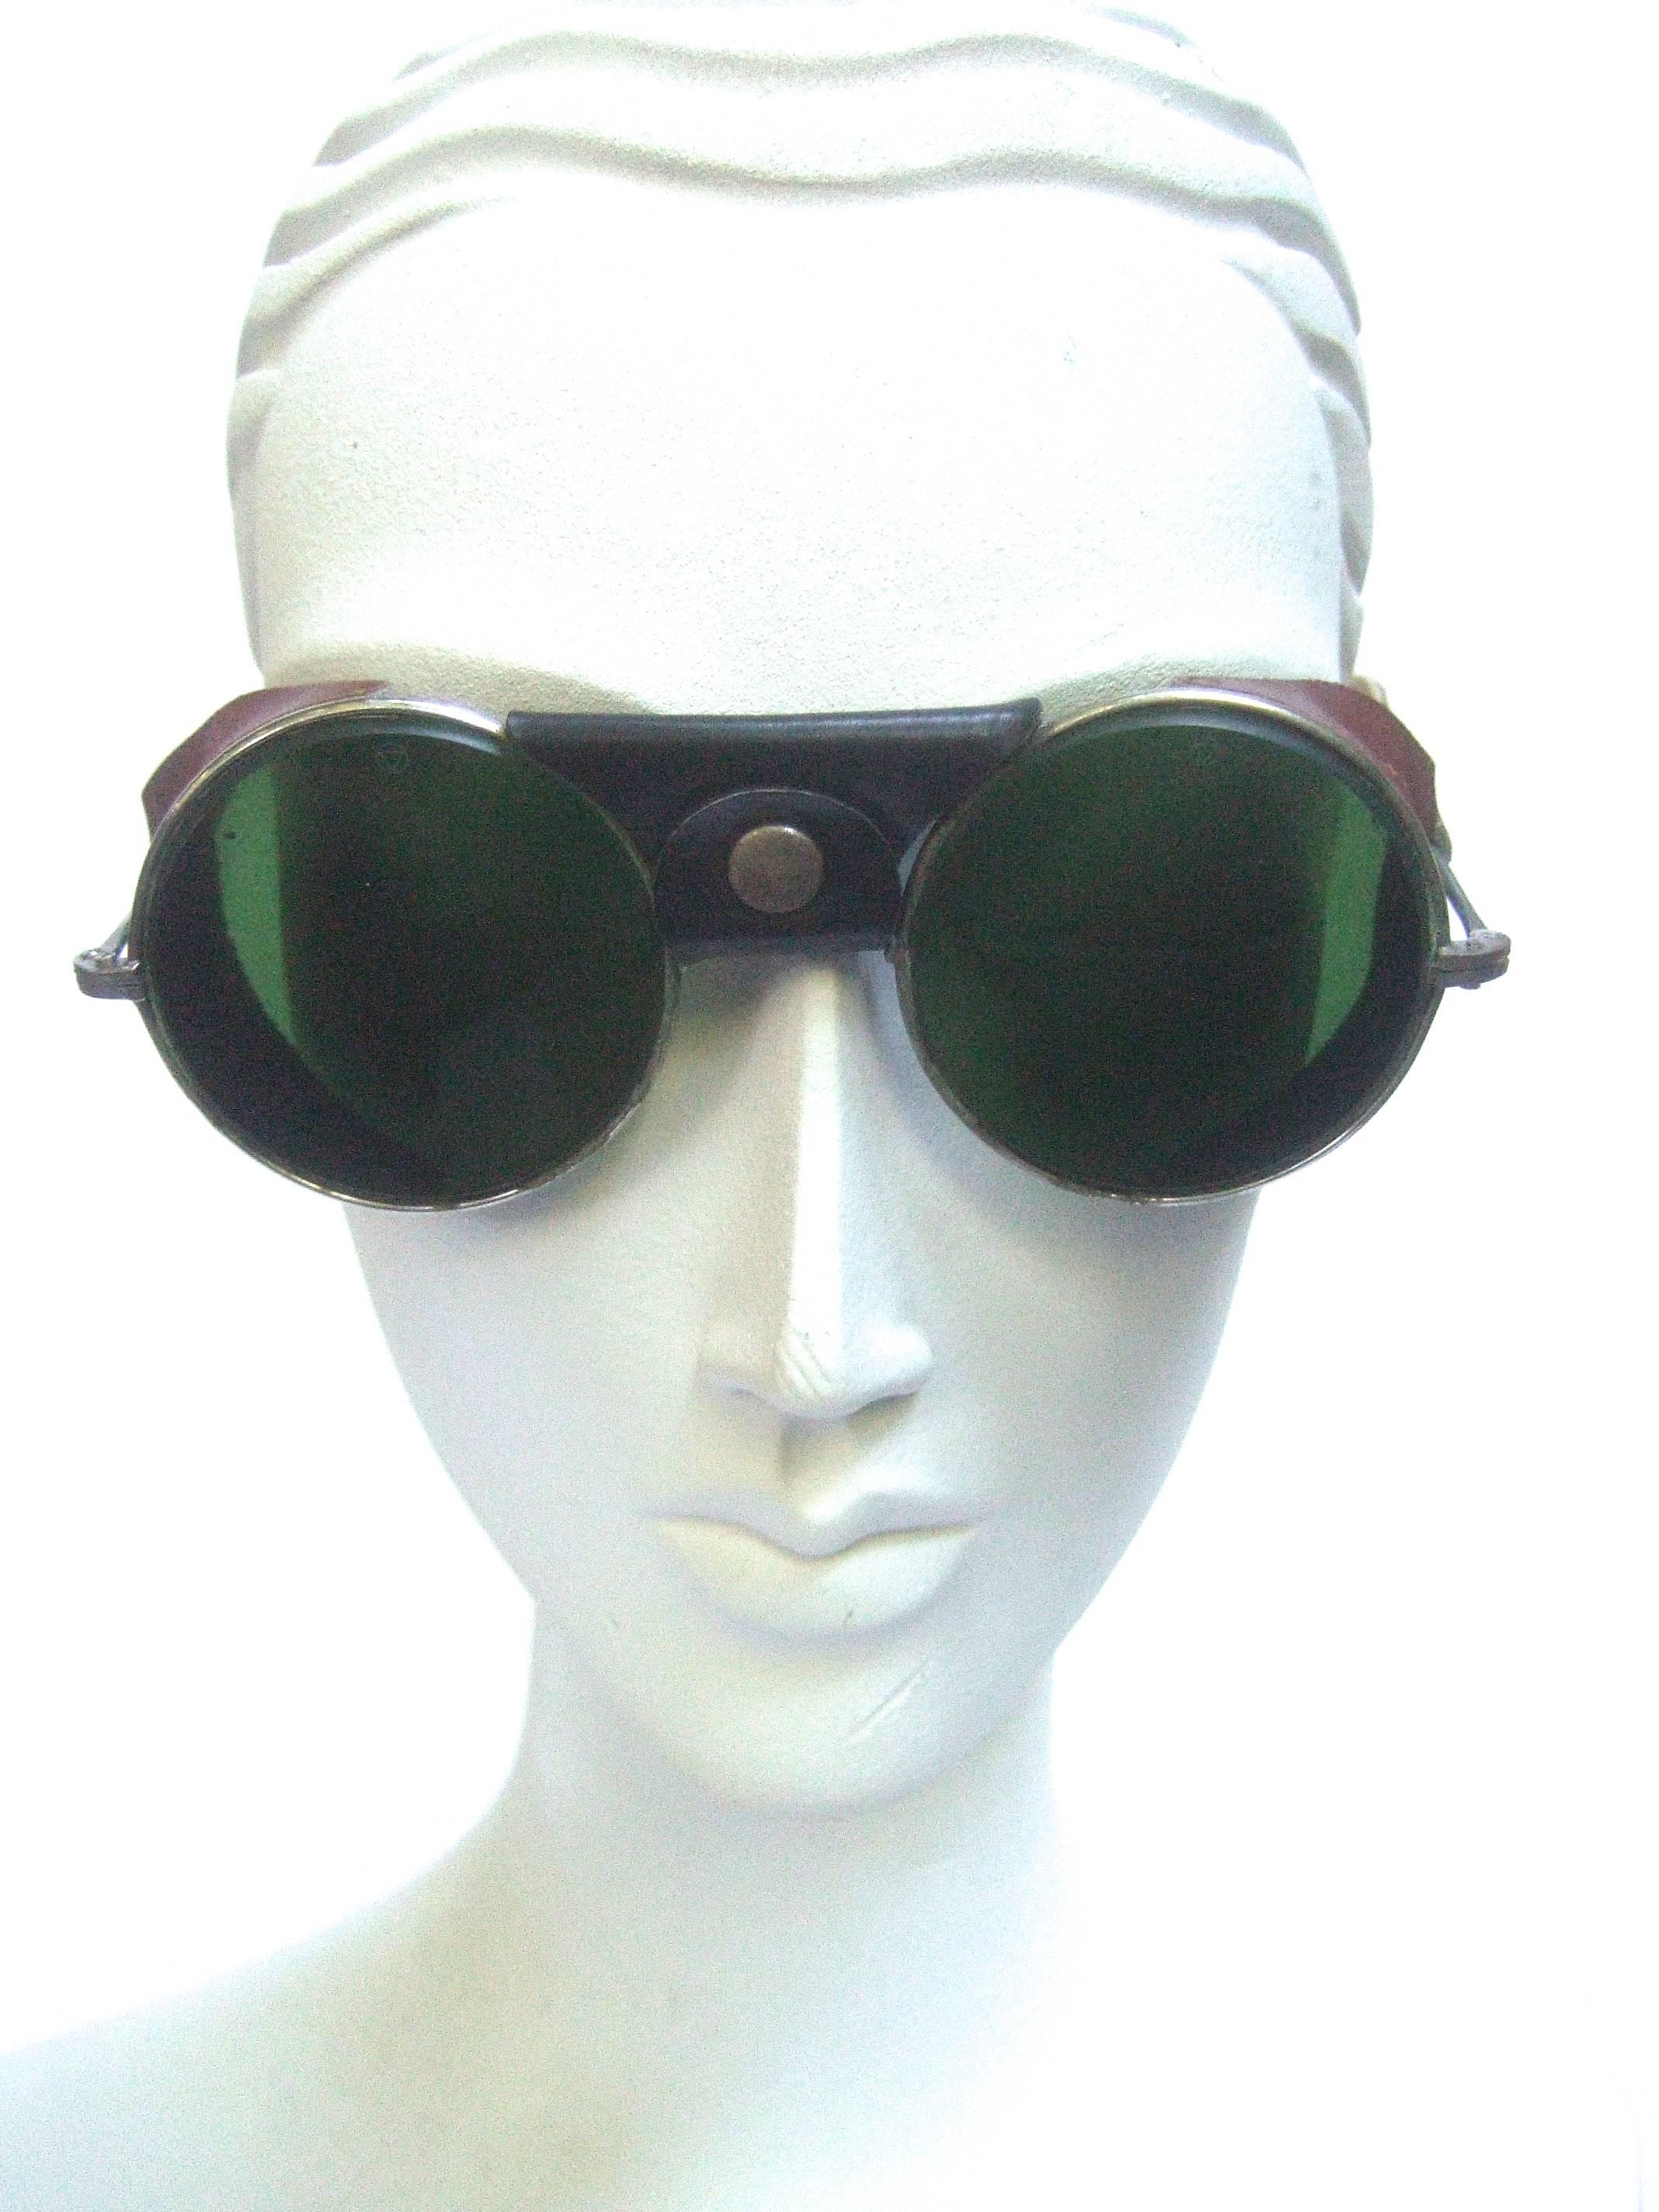 1940s Glass lens leather trim unisex aviator sunglasses 
The avant grade retro sunglasses are designed with 
circular dark green glass lenses 

The sides of the unique sunglasses are designed 
with brown leather perforated panels 
The center section